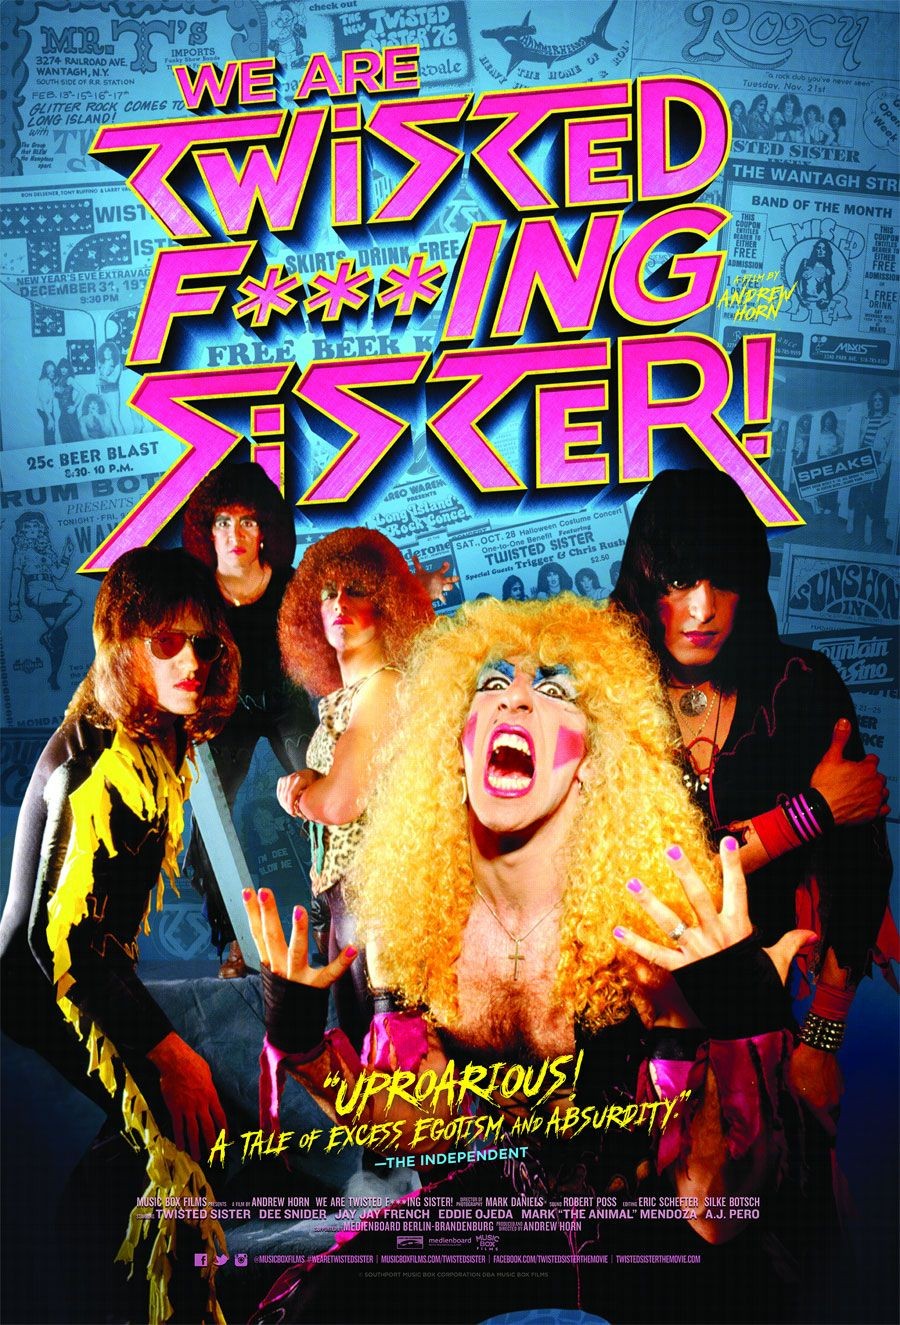 We are Twisted F***ing Sister – Fantastic Documentary on Twisted Sister’s Early Years!